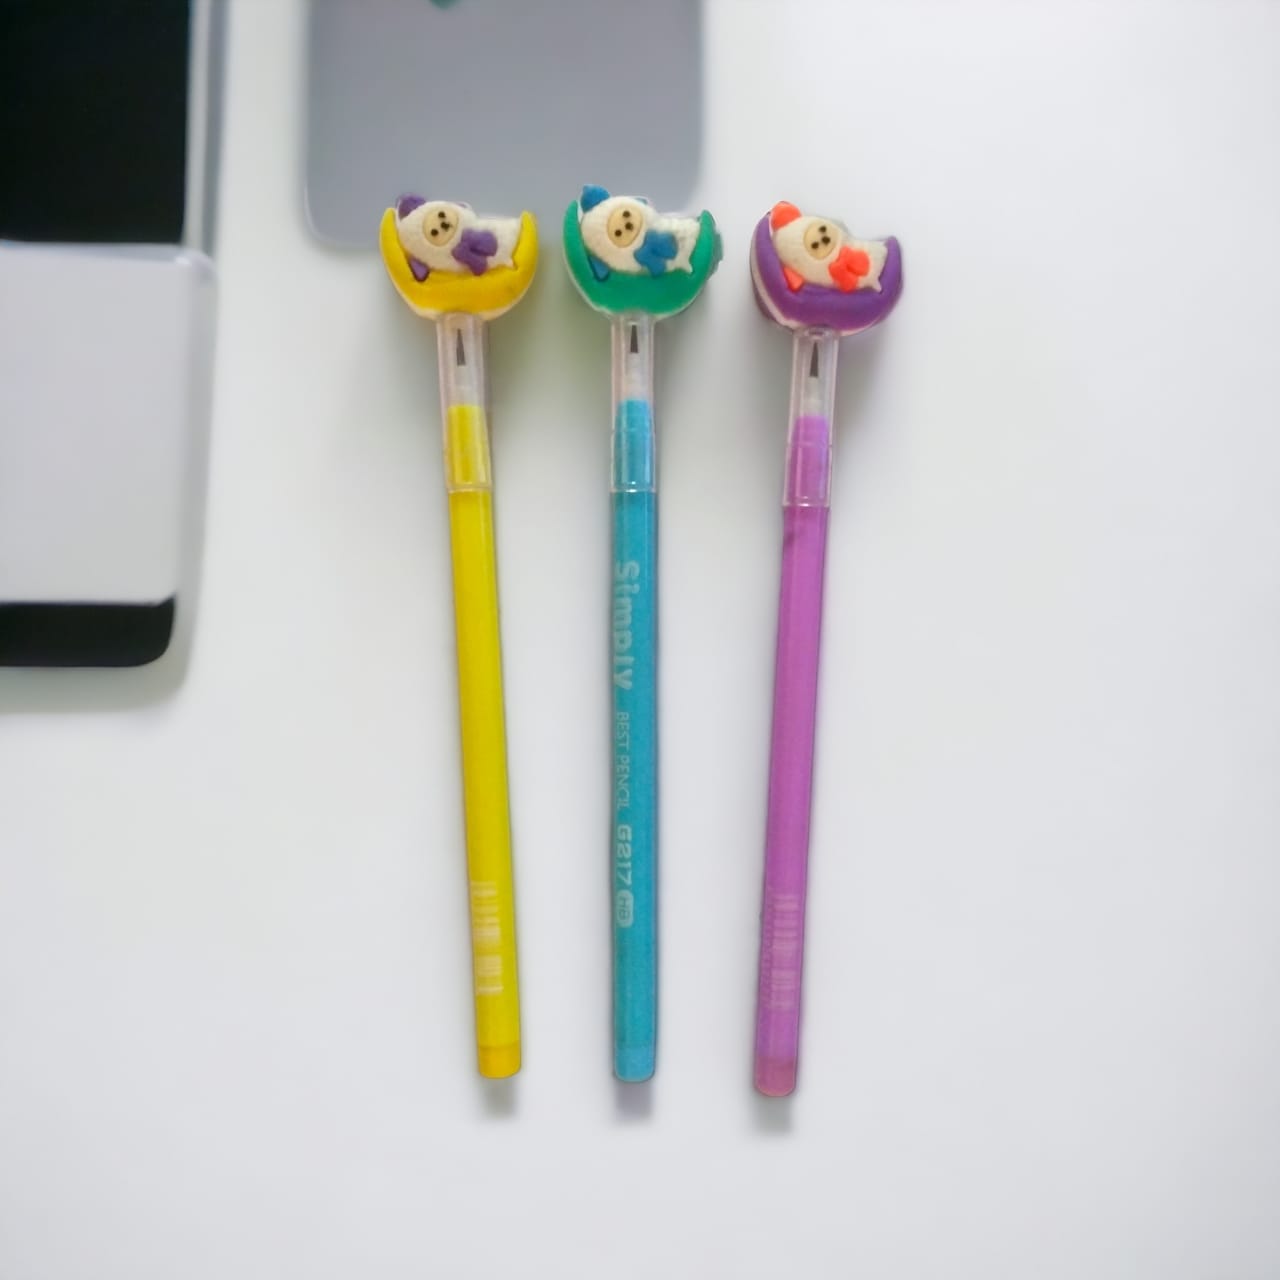 UB collection/Shop rahega. Pencil Baby Sheep Lead Pencil with Push Type - Stationery Return Gift - Kids Toys for Gifting